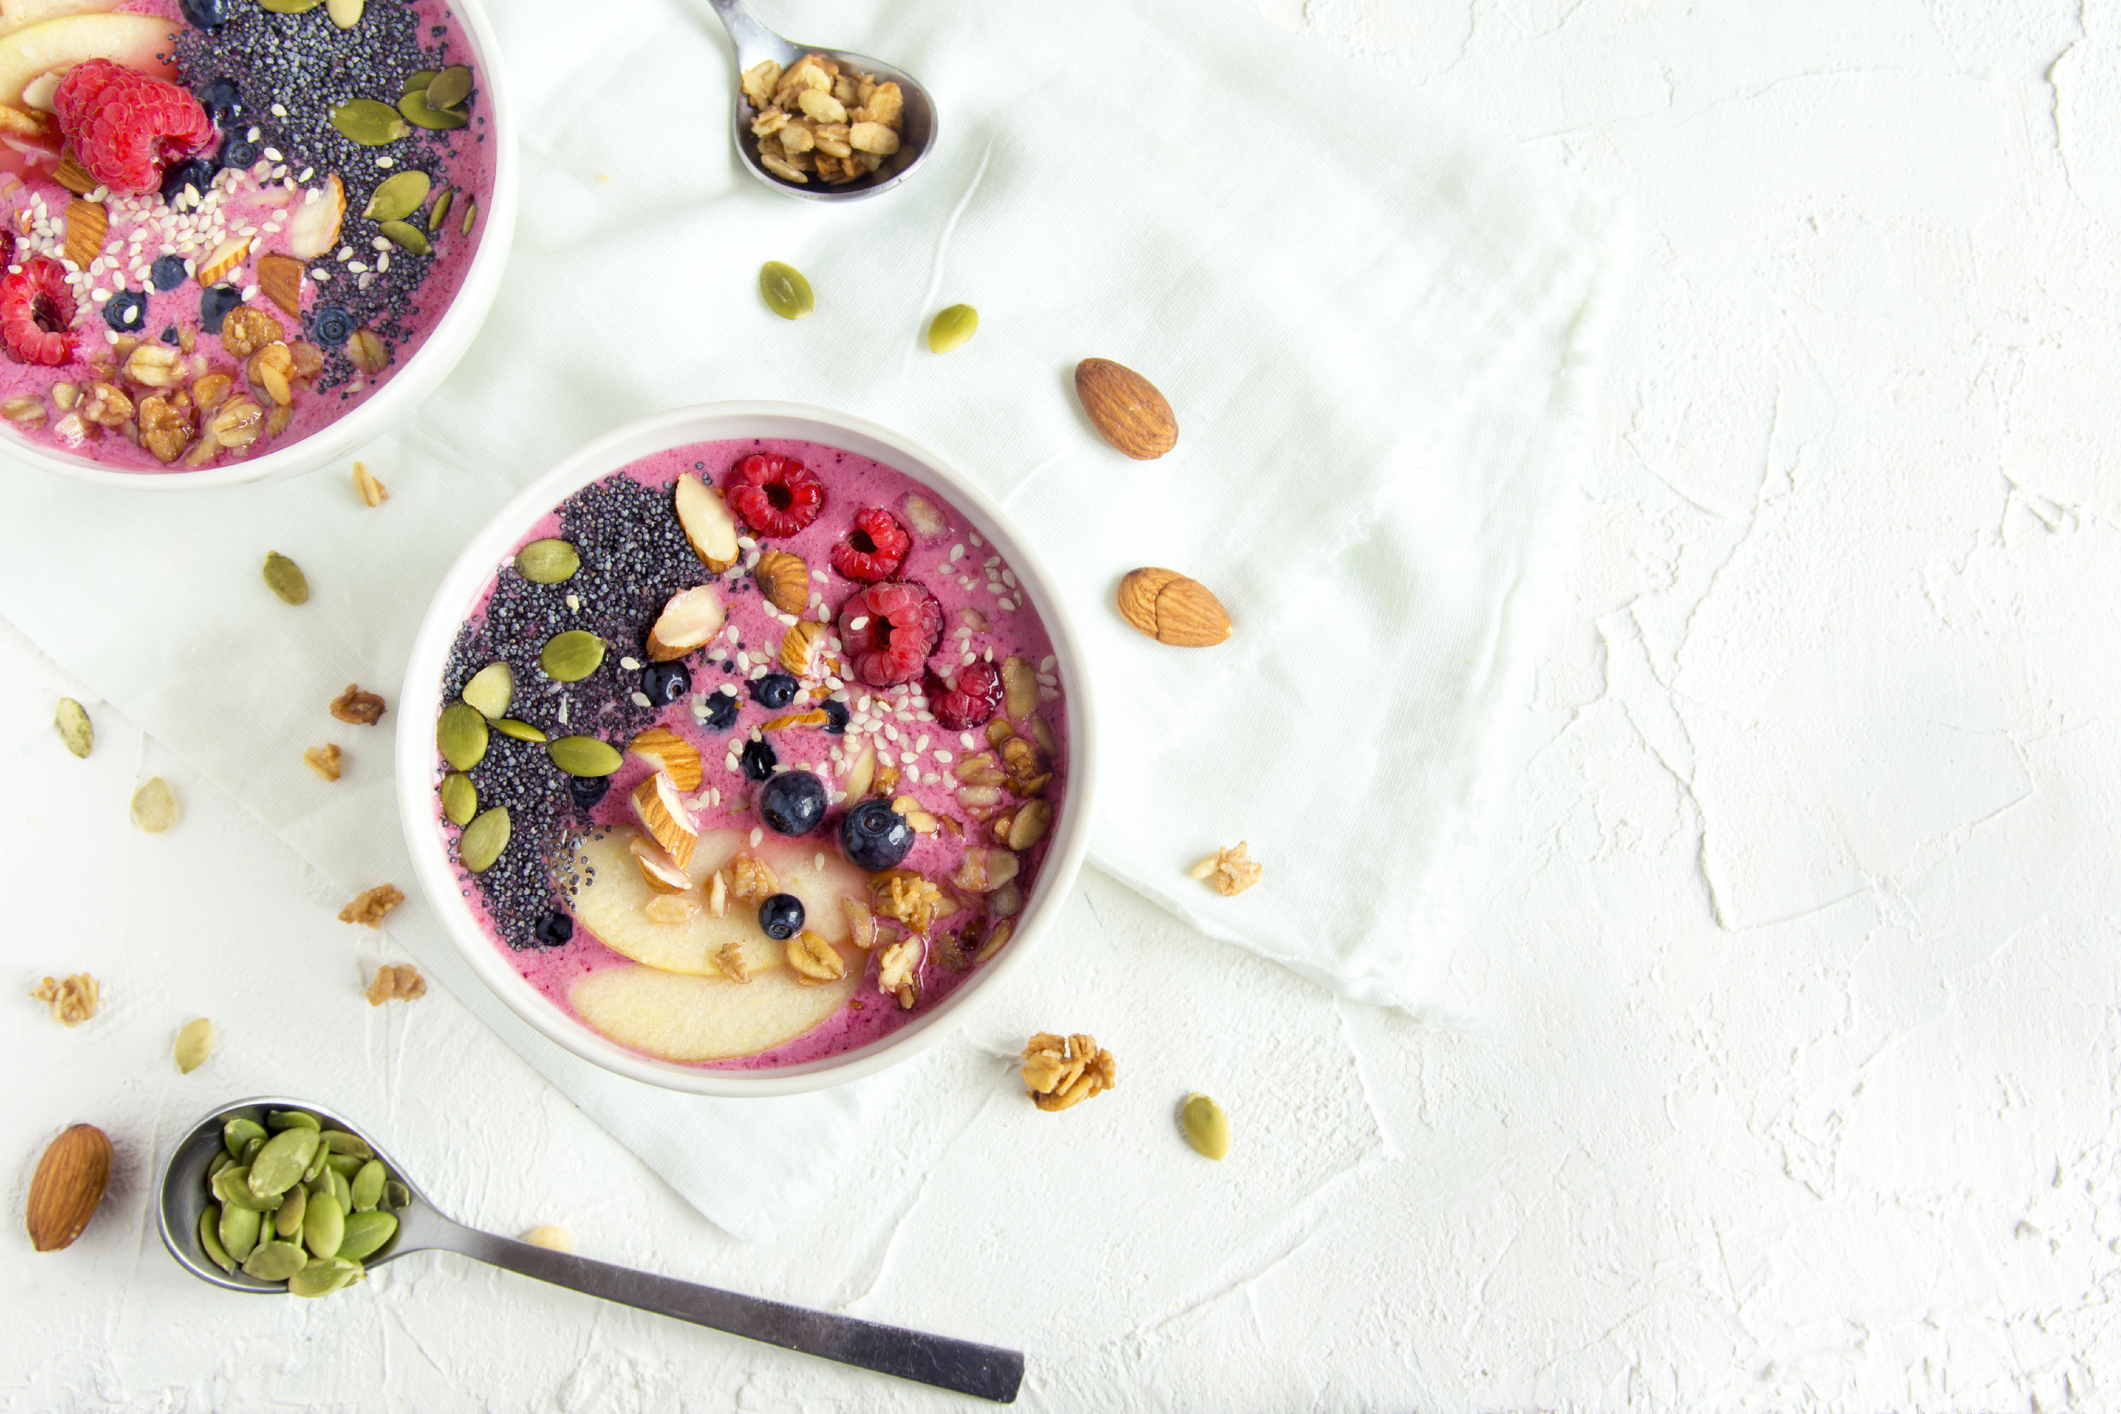 Keep the acai bowl toppings simple to stay healthy. 